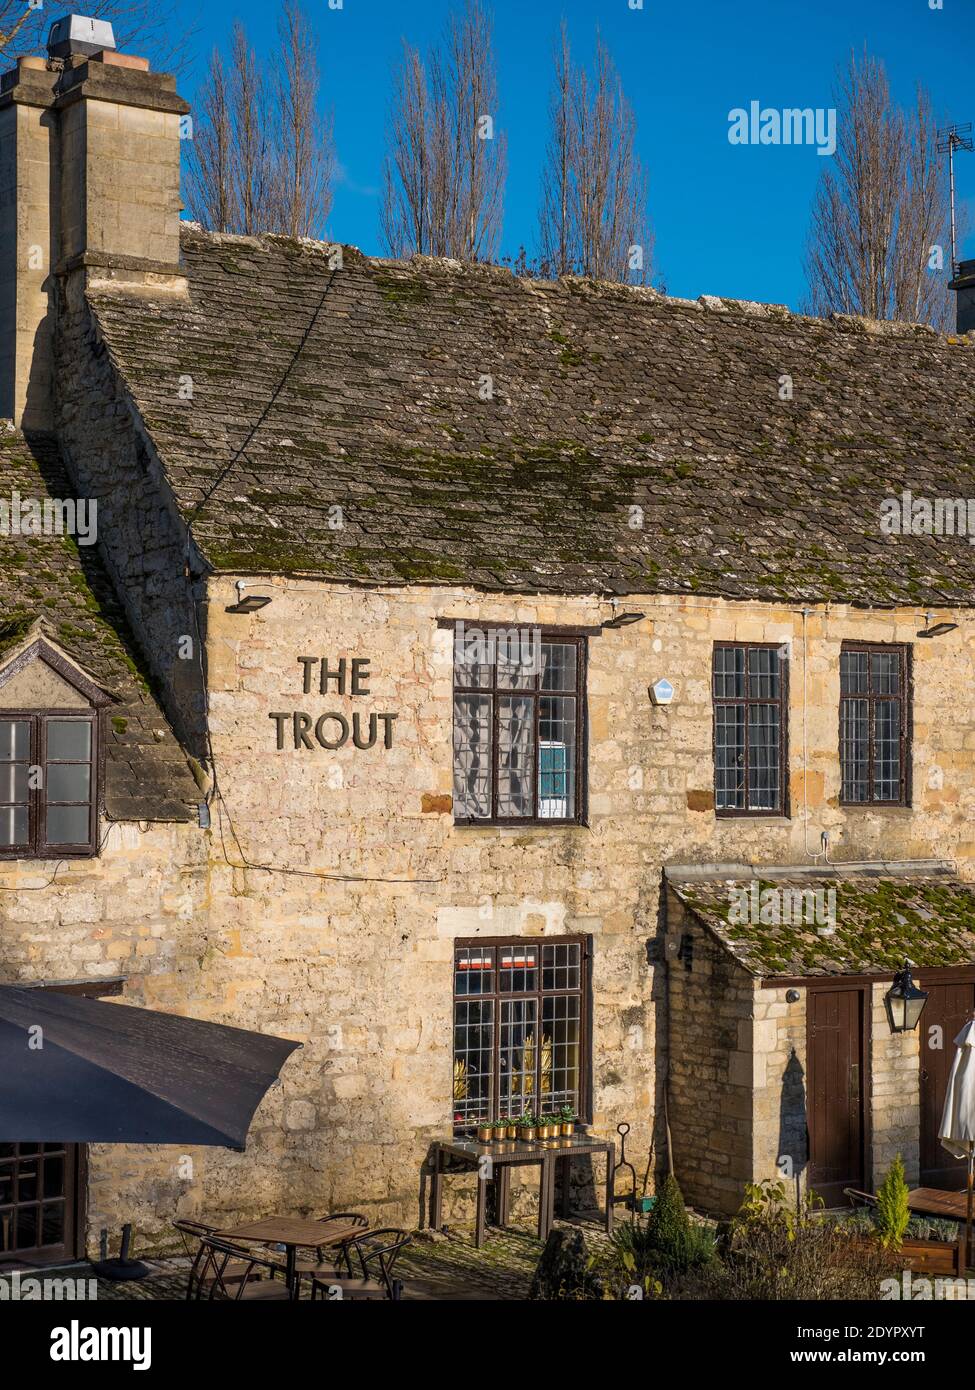 The Trout Inn, River Thames, Wolvercote, Oxford, Oxfordshire, England, UK, GB. Stock Photo